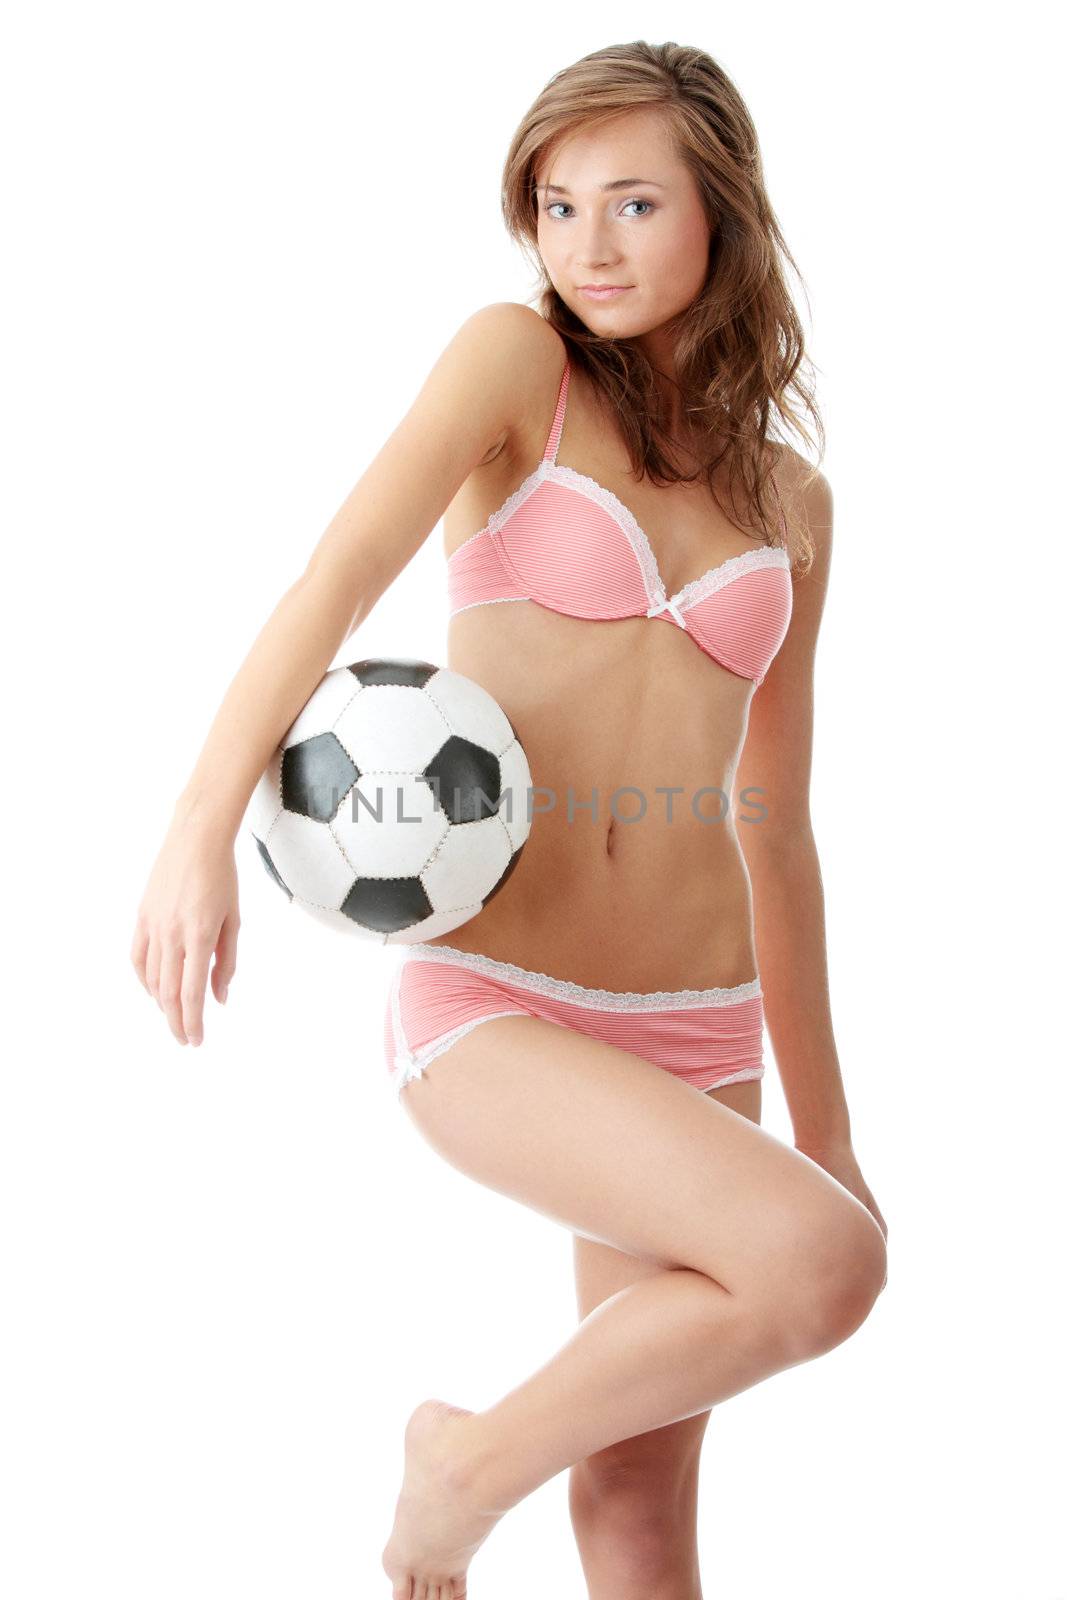 Fashion young woman with a football ball isolated over a white background